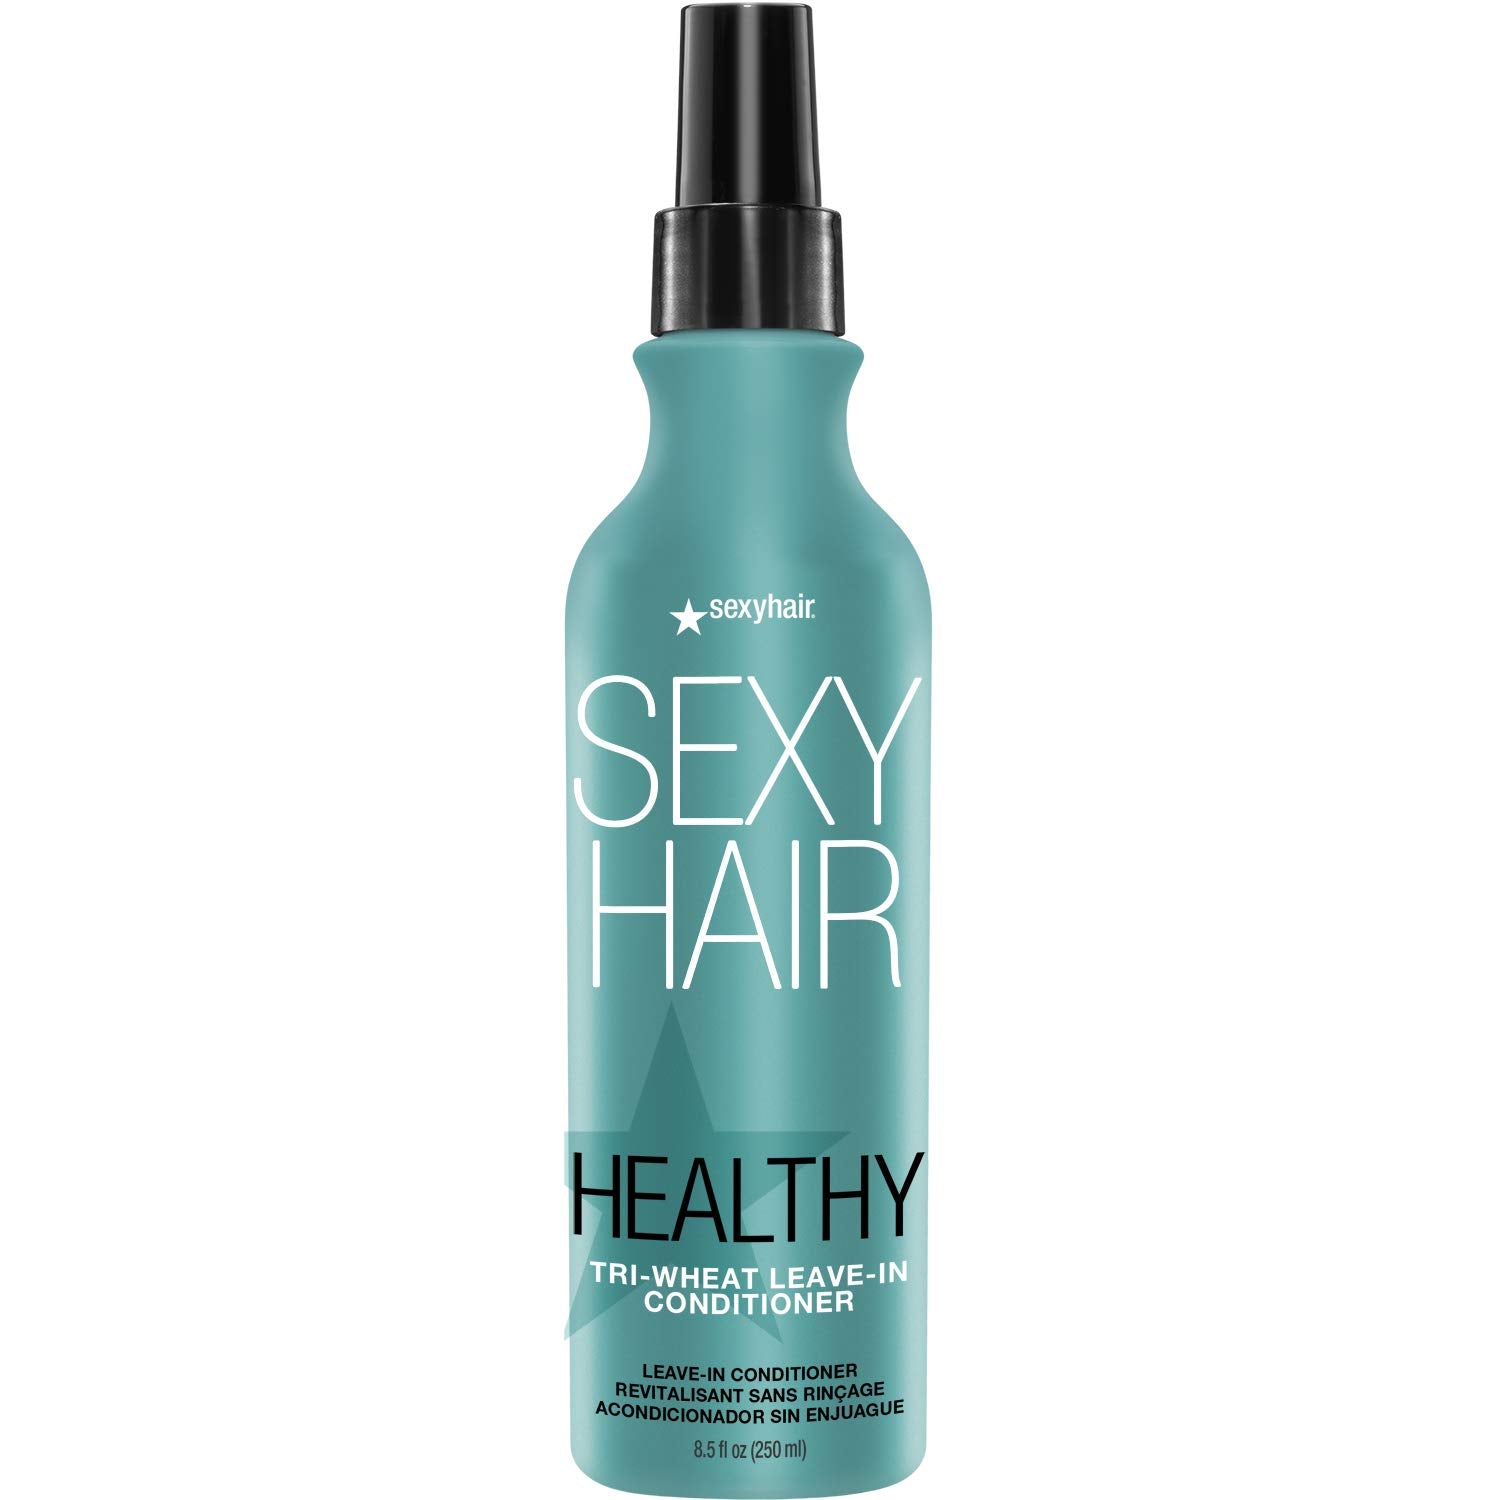 SexyHair Healthy Tri-Wheat Leave-In Conditioner (Buy 3 Get 1 Free Mix & Match)